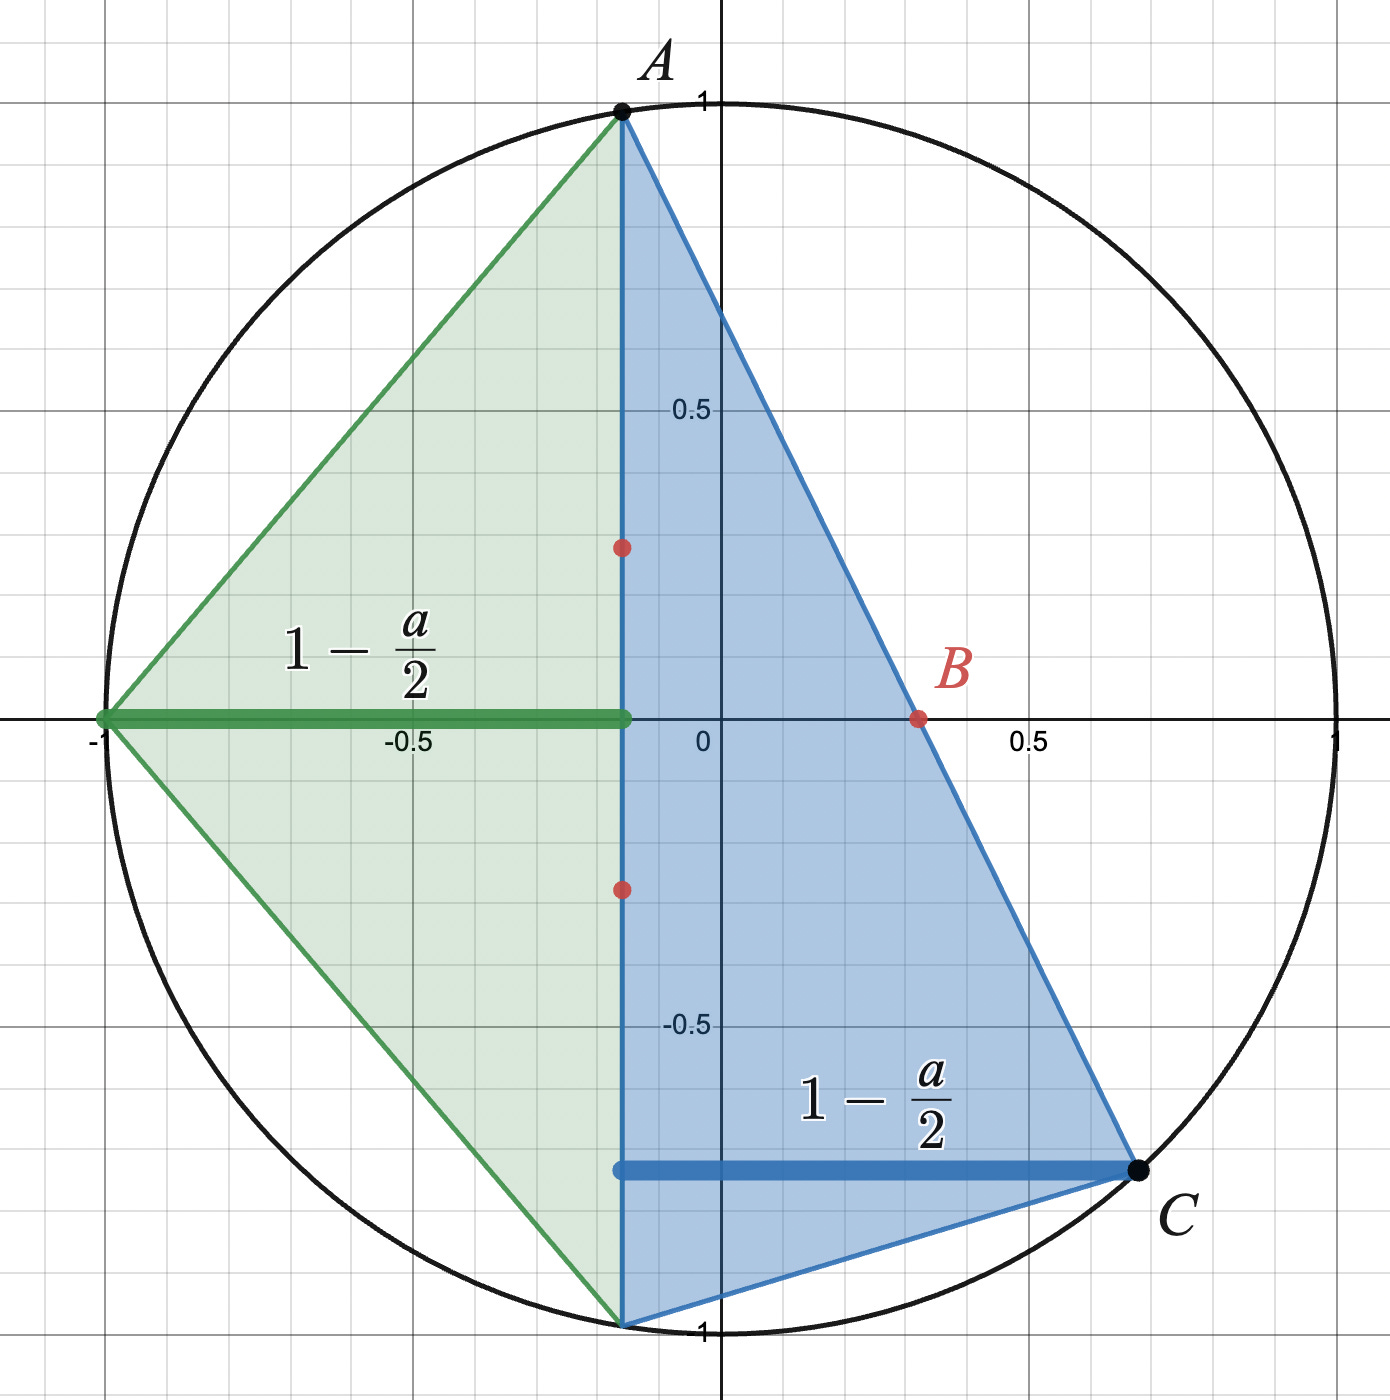 Three red obstacles are in the unit circle, forming an equilateral triangle. One is at (a, 0), labeled point B. The two obstacles on the left are on an external triangle with height 1-a/2. They are also on an internal triangle whose third vertex is in Quadrant 4, labeled point C. Point A is the top endpoint of the edge with two obstacles.